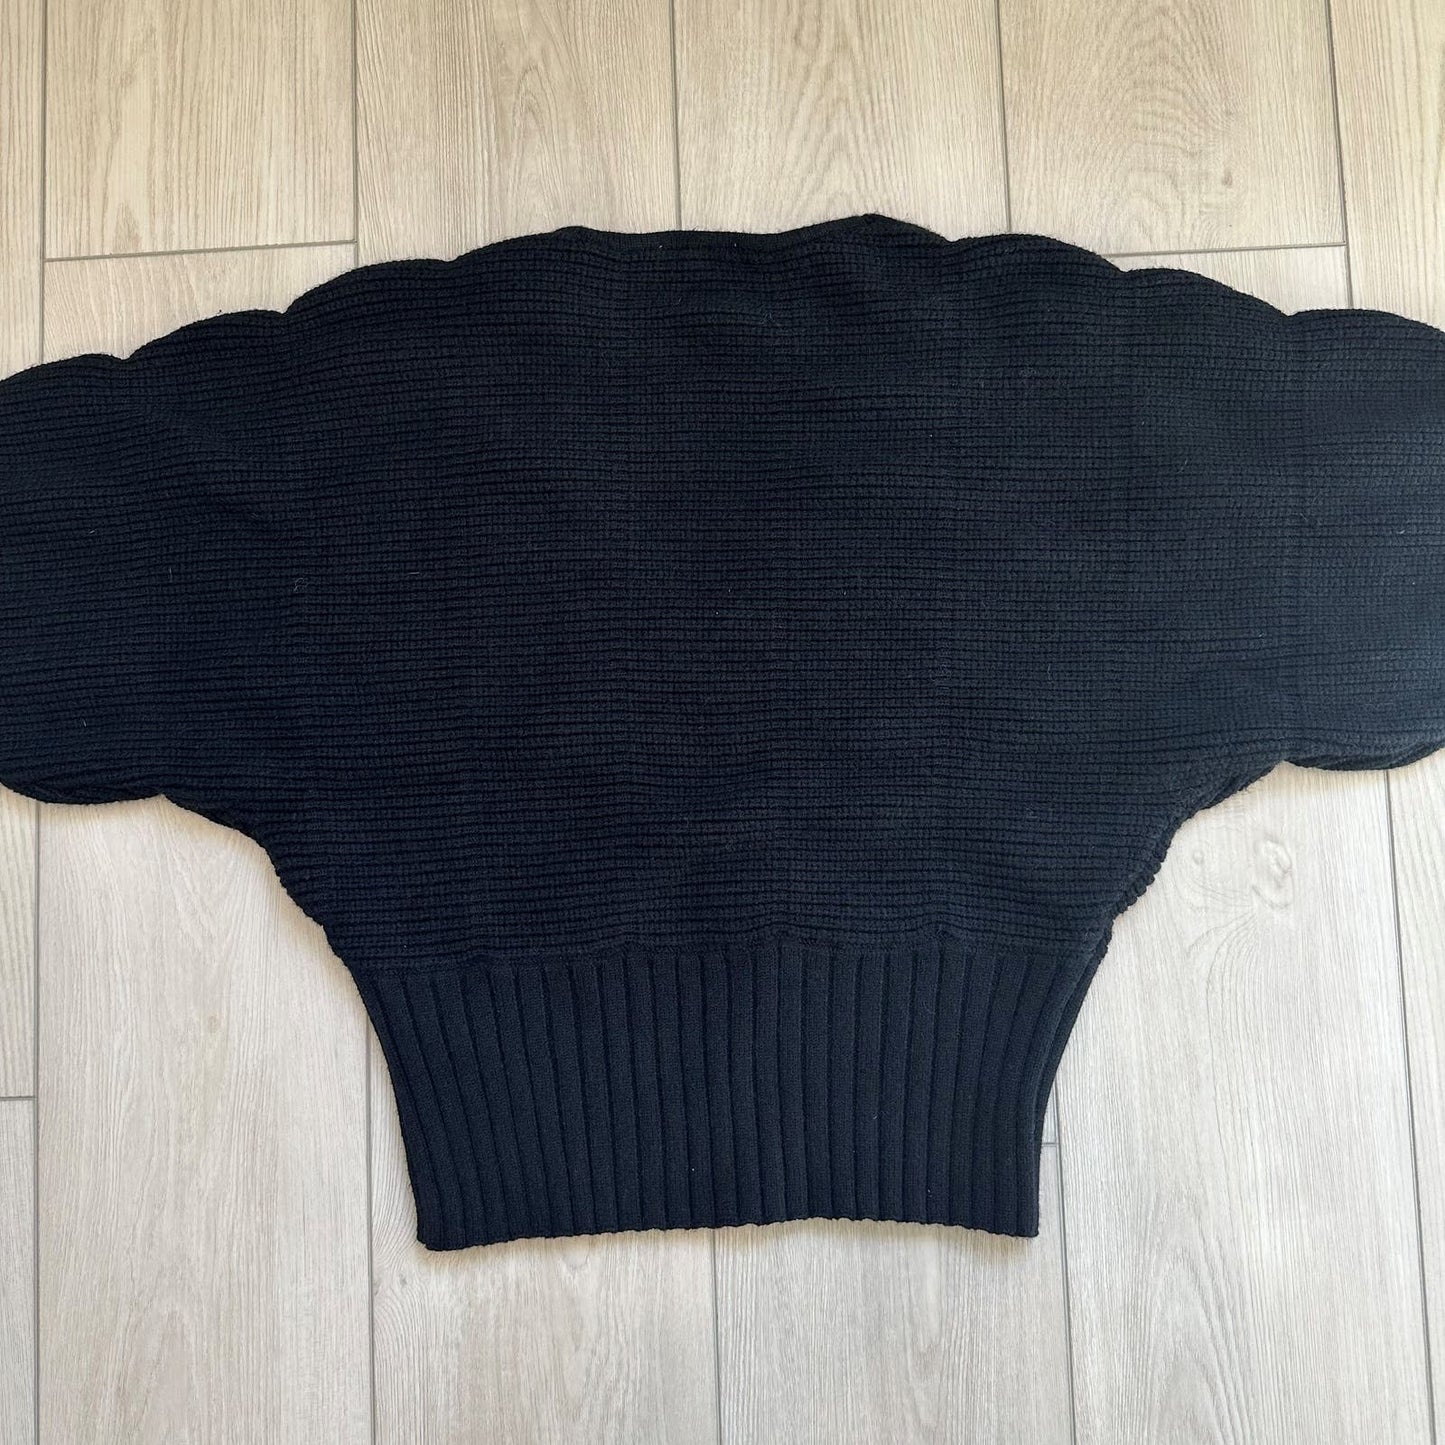 Topshop black ribbed v-neck sweater with volume sleeves